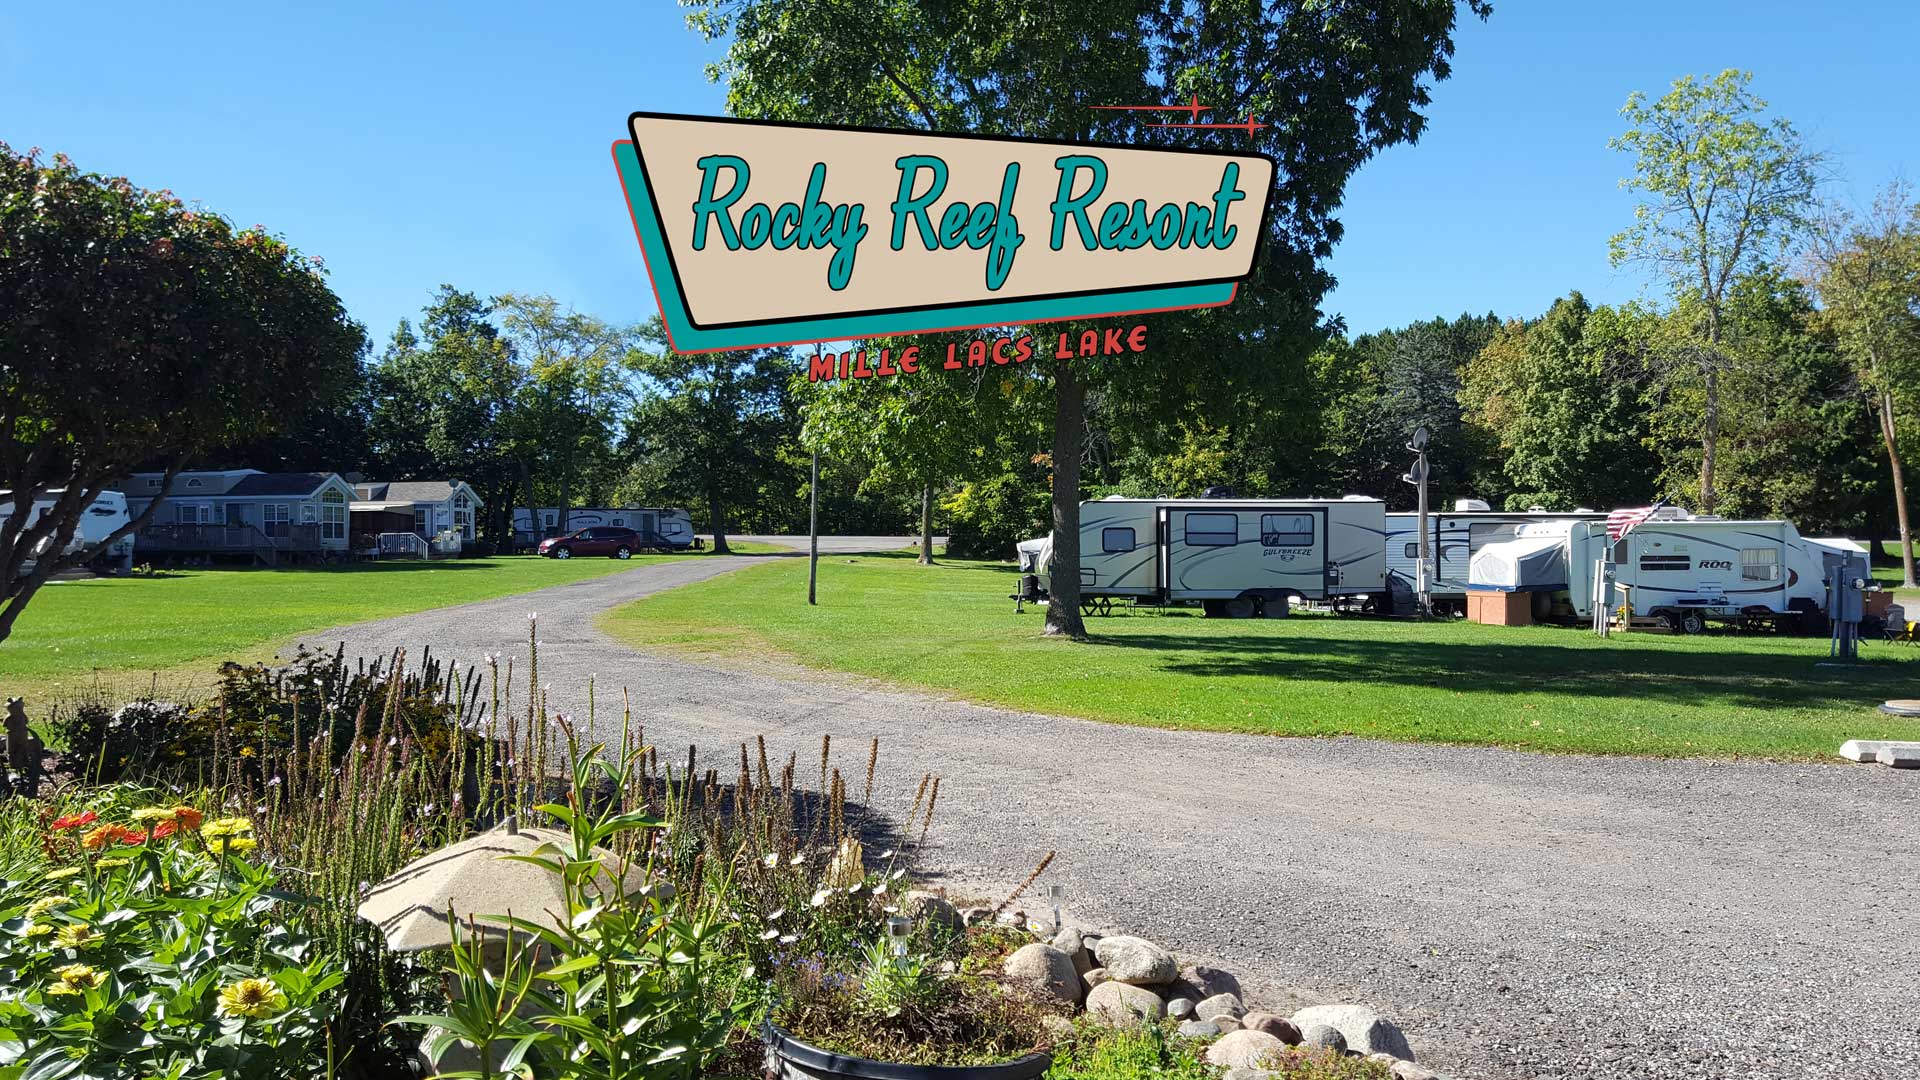 Rocky Reef Resort's RV Park Motor Home located at Mille Lacs Lake in Onamia, Minnesota